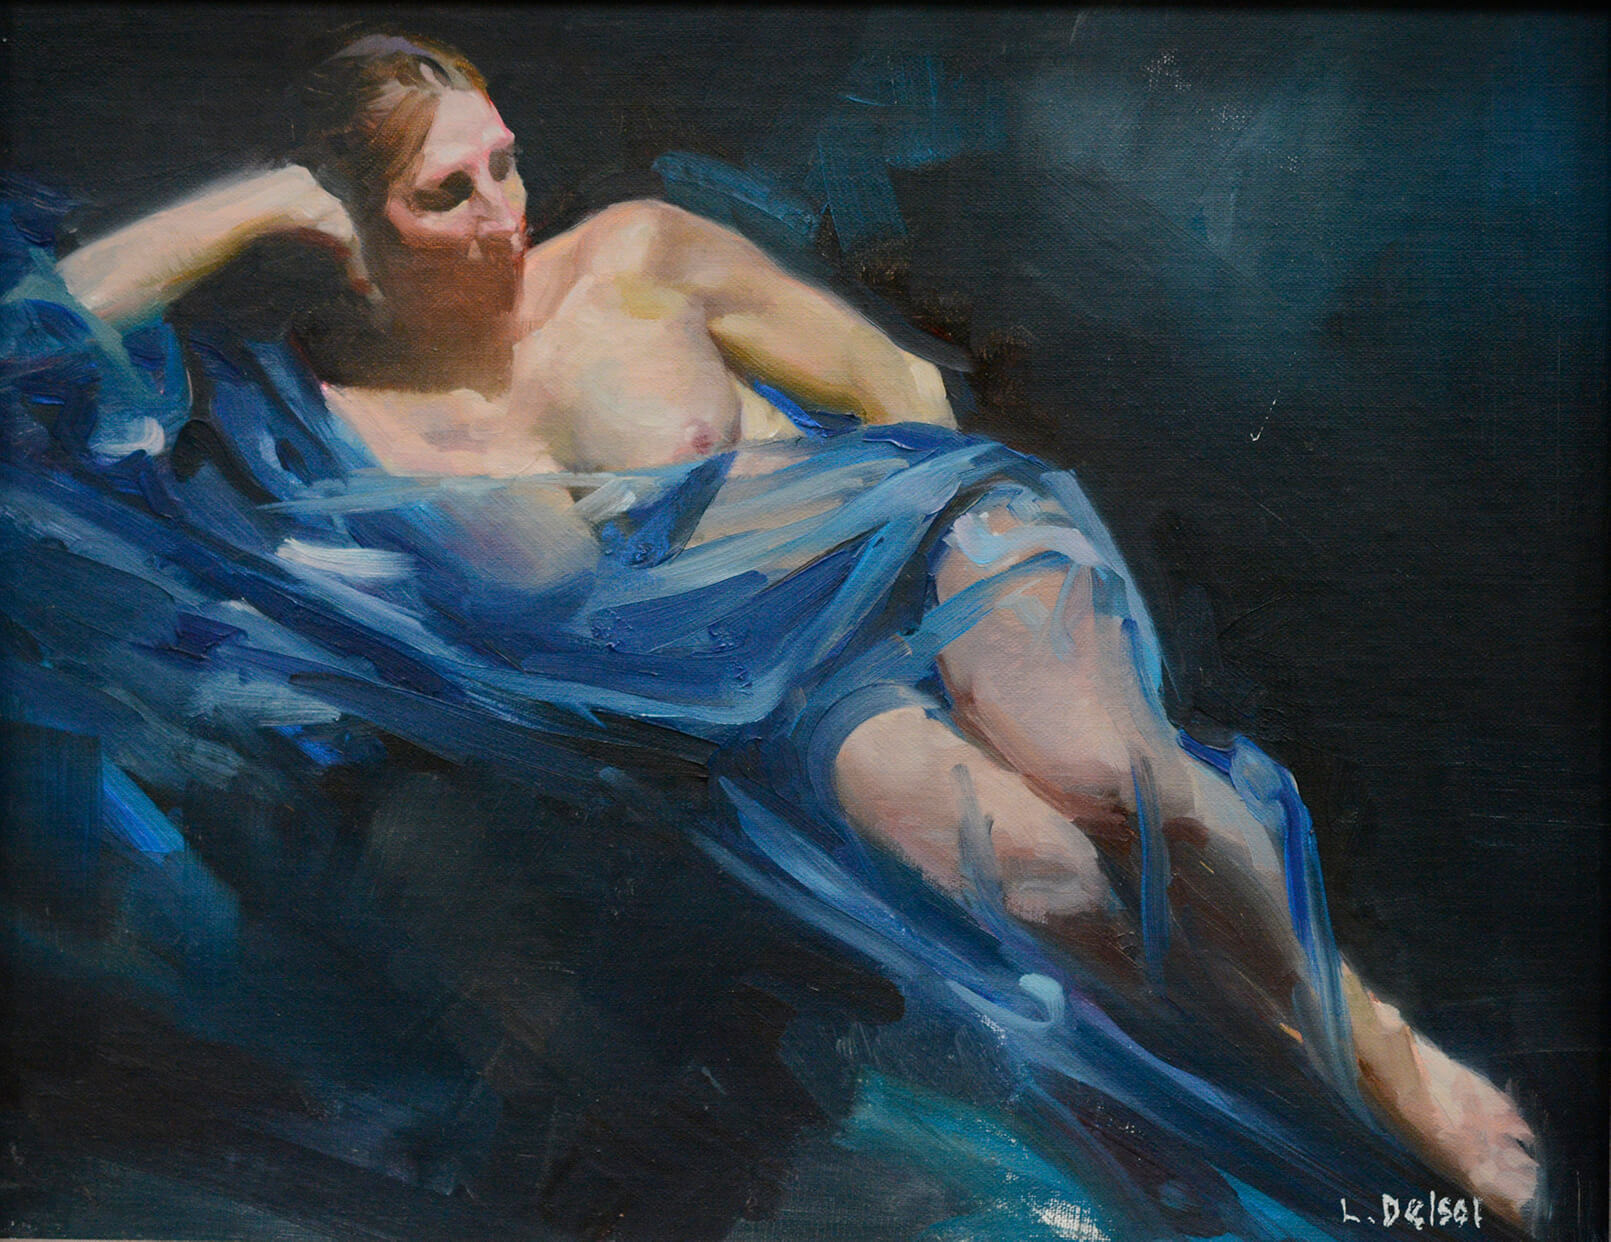 Realistic figurative oil painting of nude reclining woman draped in blue chiffon fabric